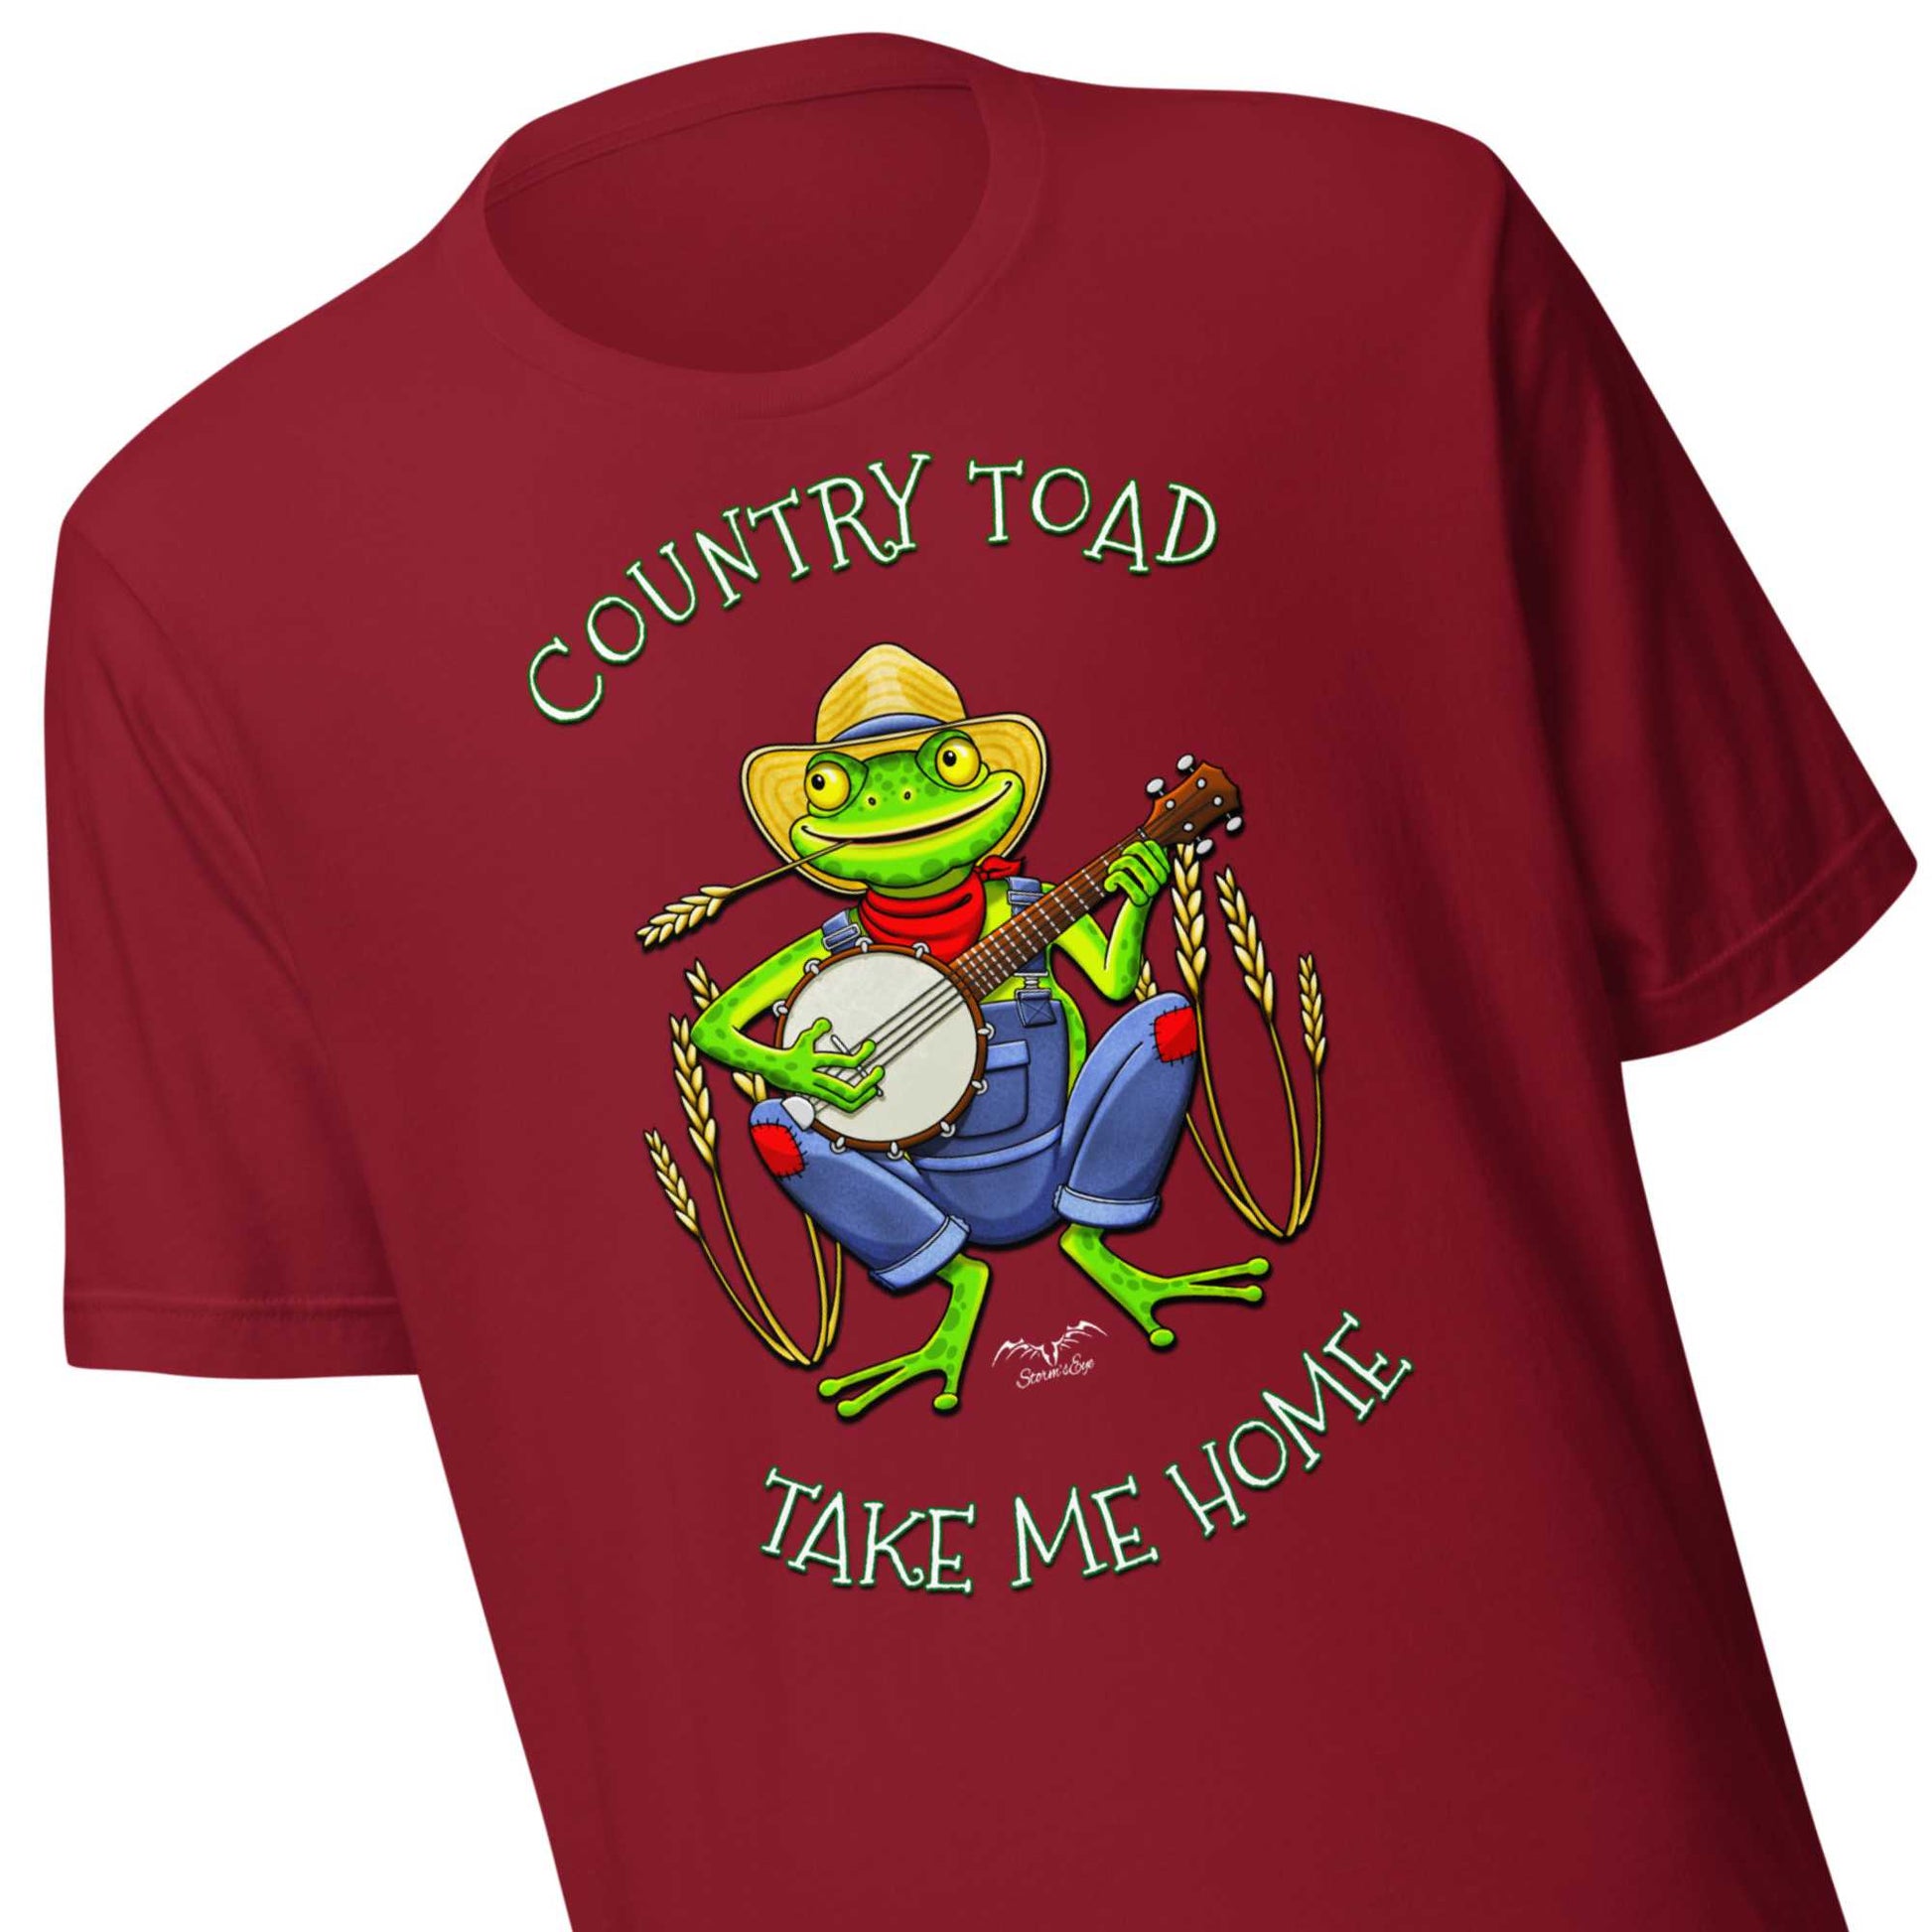 stormseye design country toad banjo T shirt, detail view cardinal red